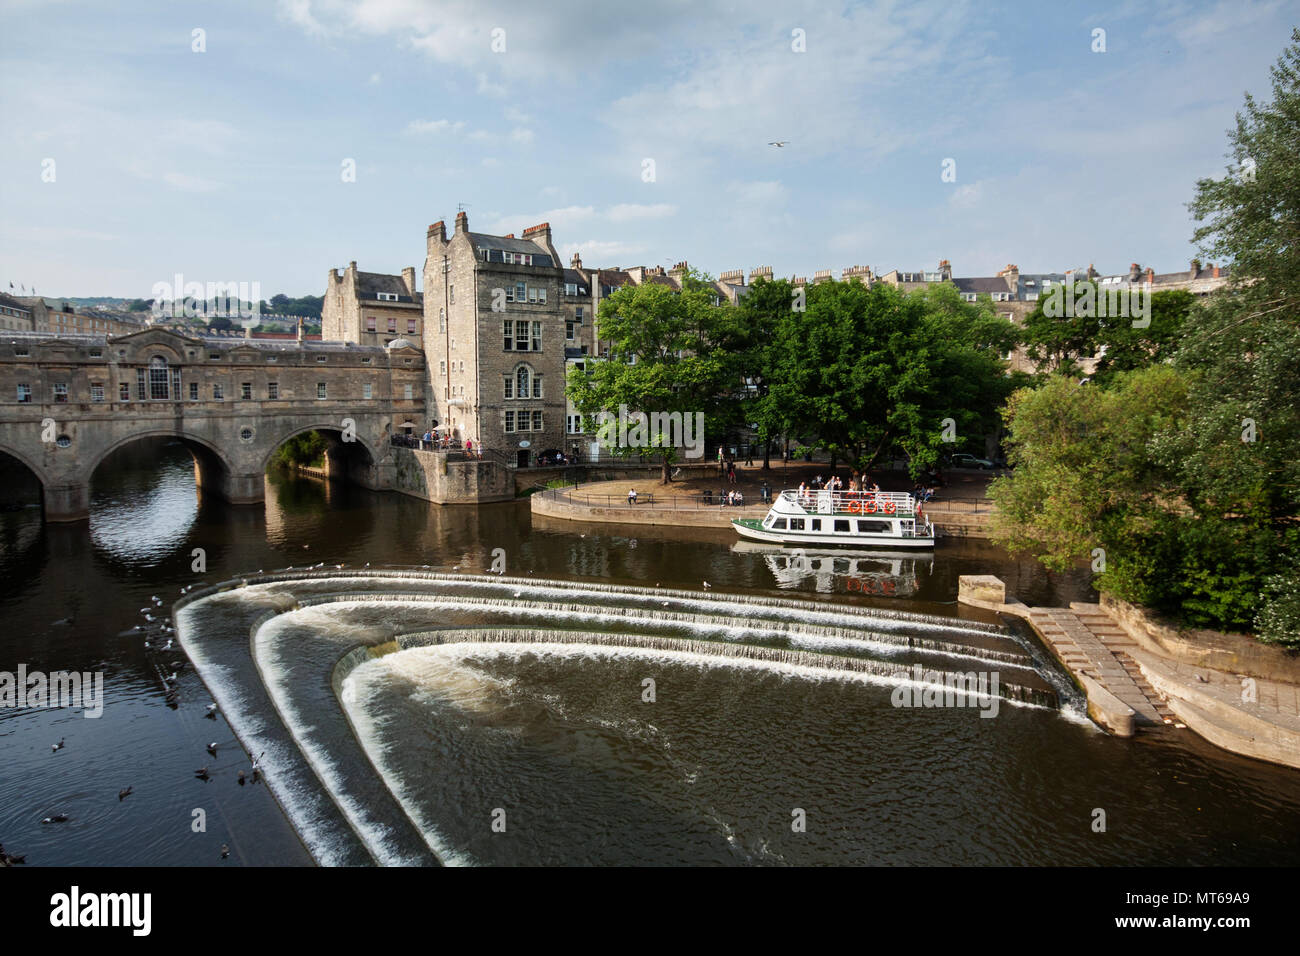 Pulteney bridge over river Avon with a tour boat, in city of Bath, England, UK. Stock Photo